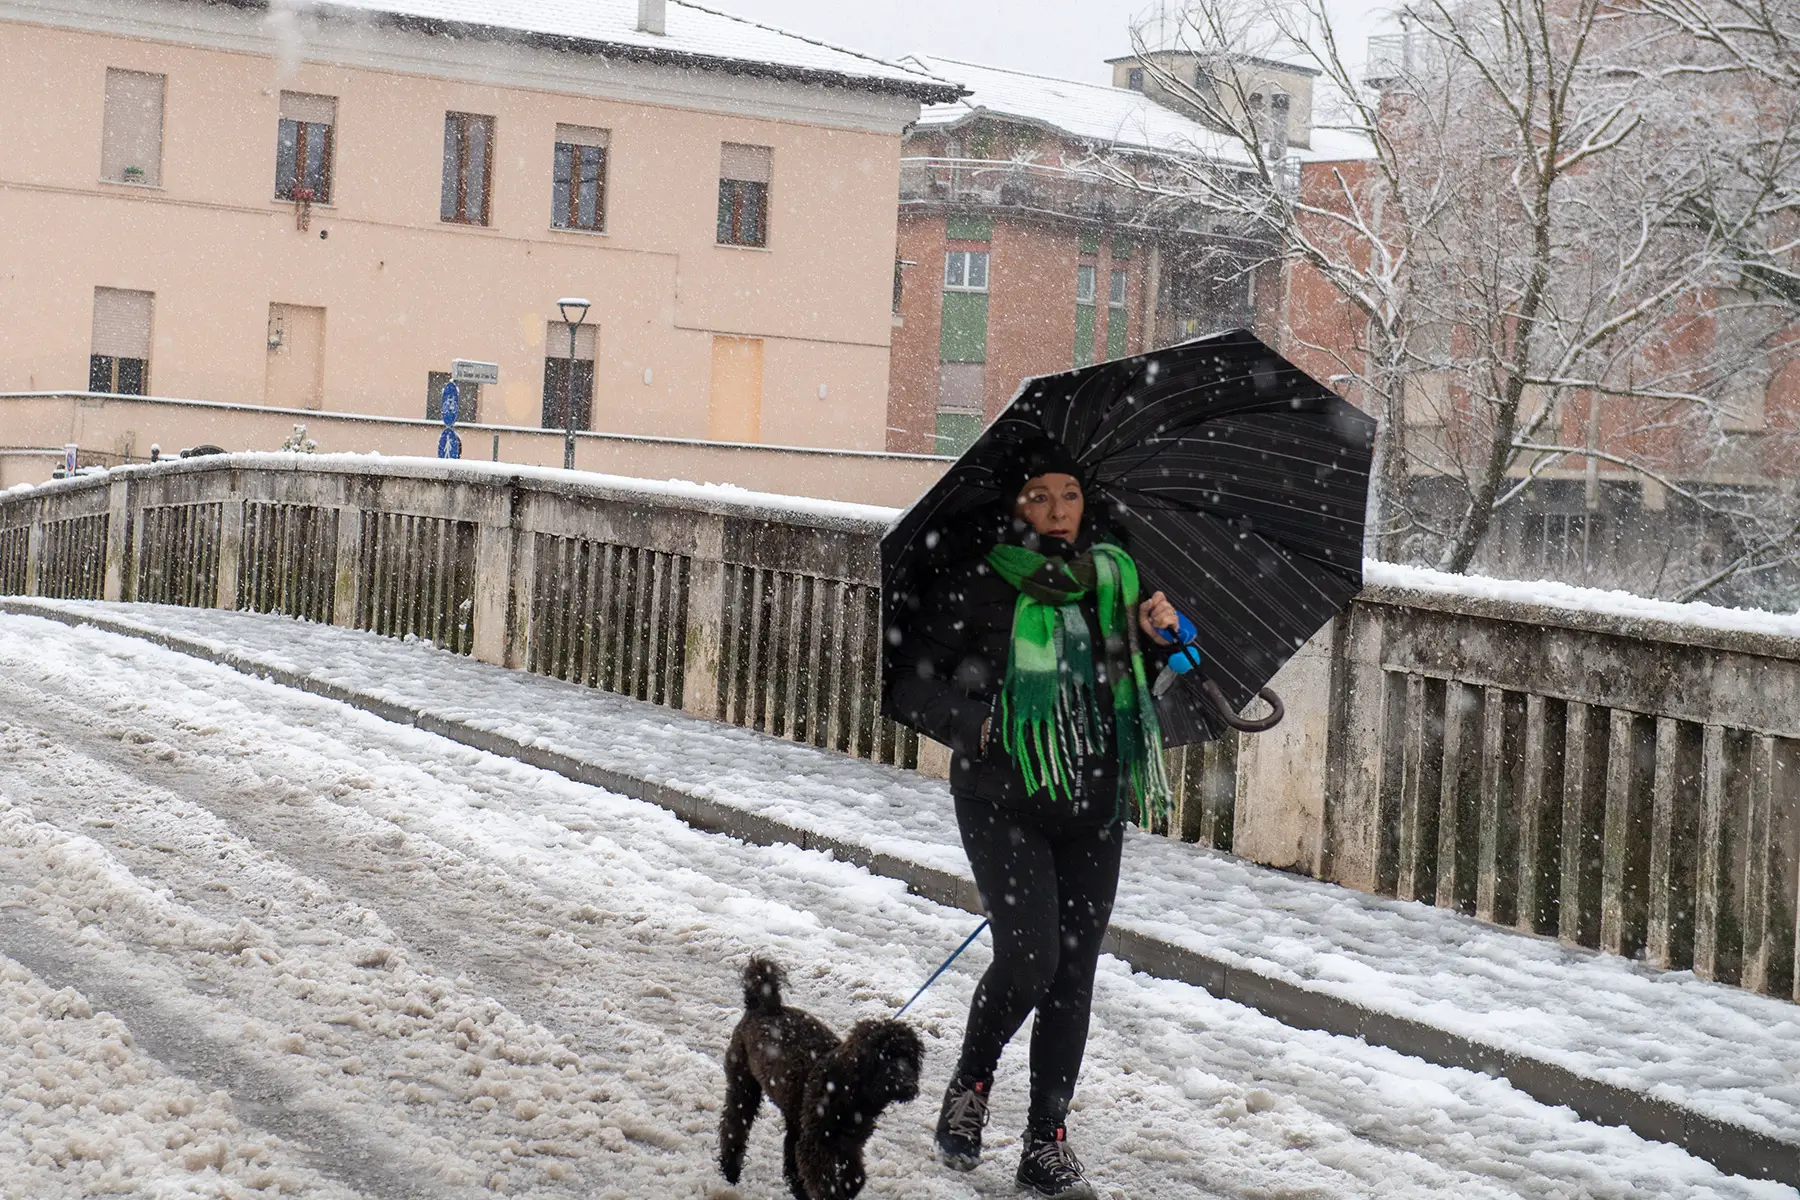 A woman walking through the snow with an umbrella in one hand and a dog on a lead in the other.